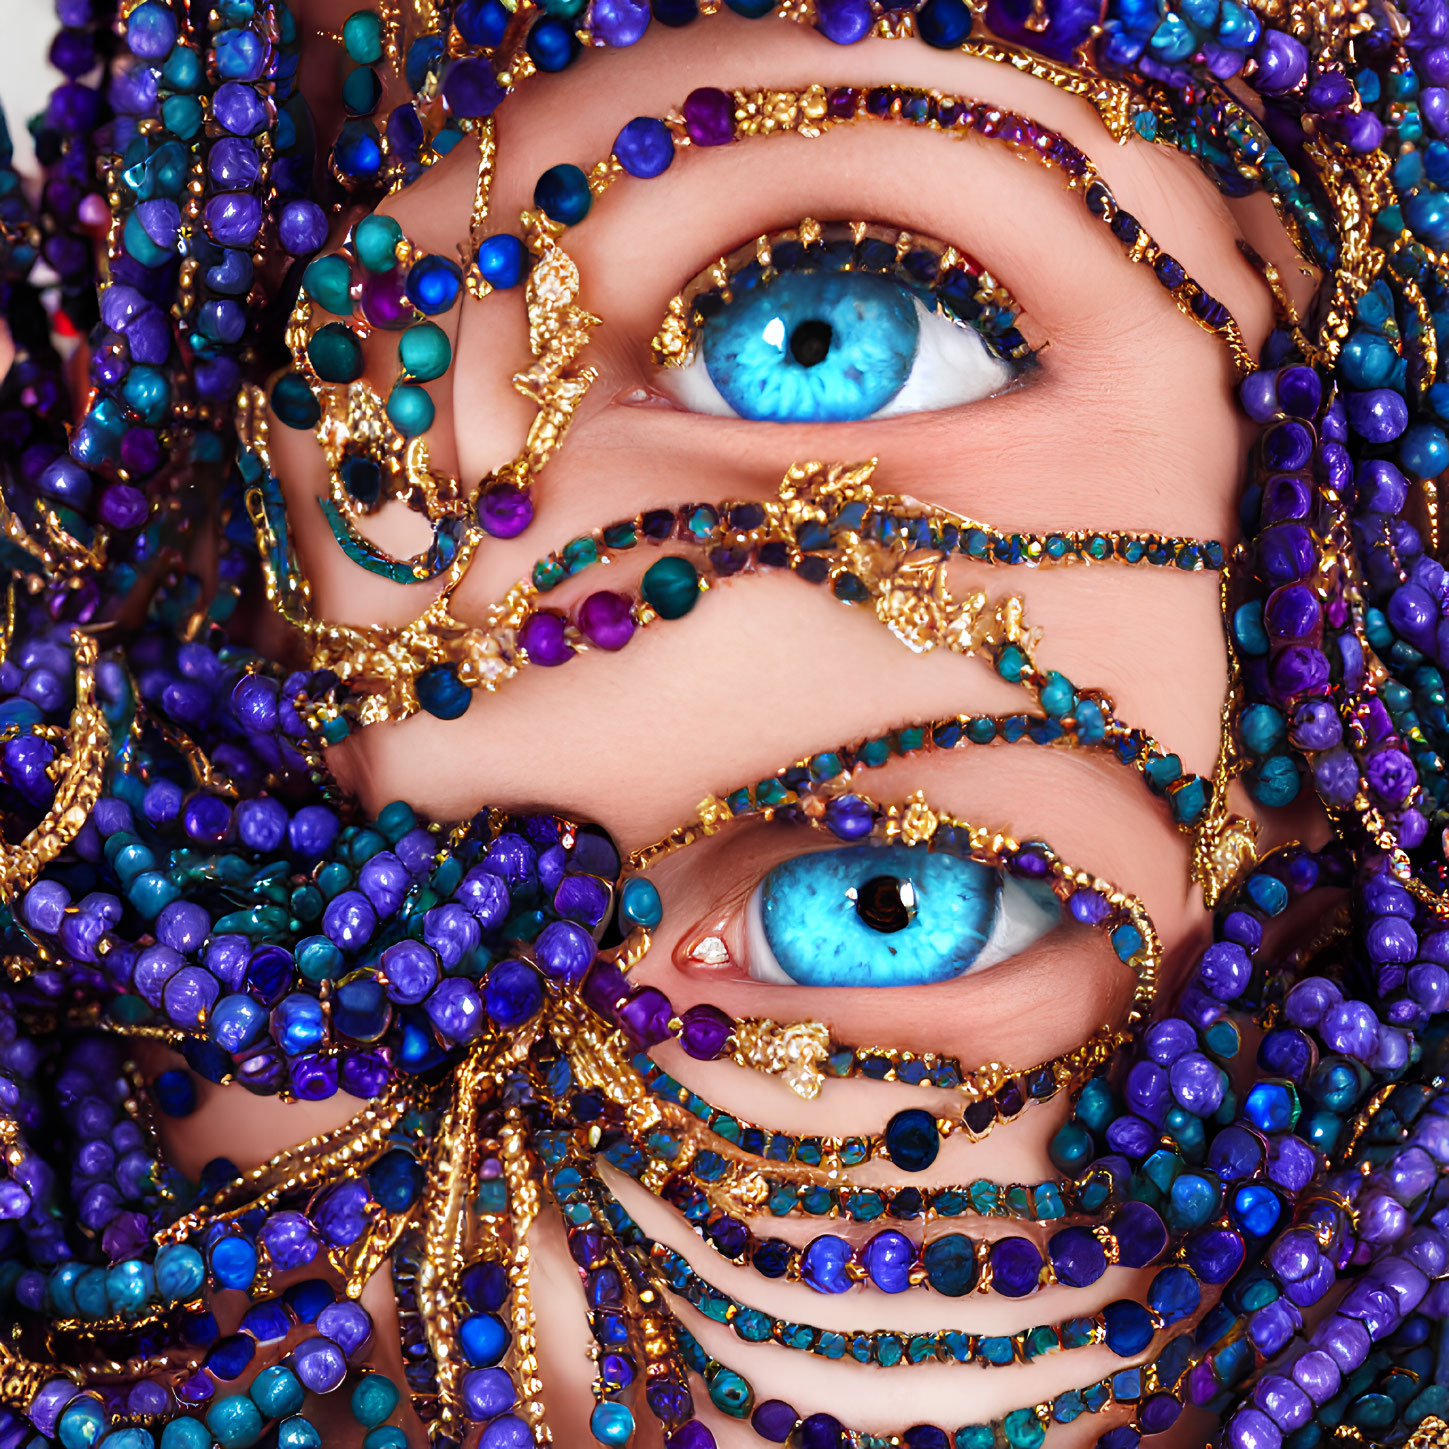 Close-up portrait of person with blue beads and gold chains accentuating blue eyes